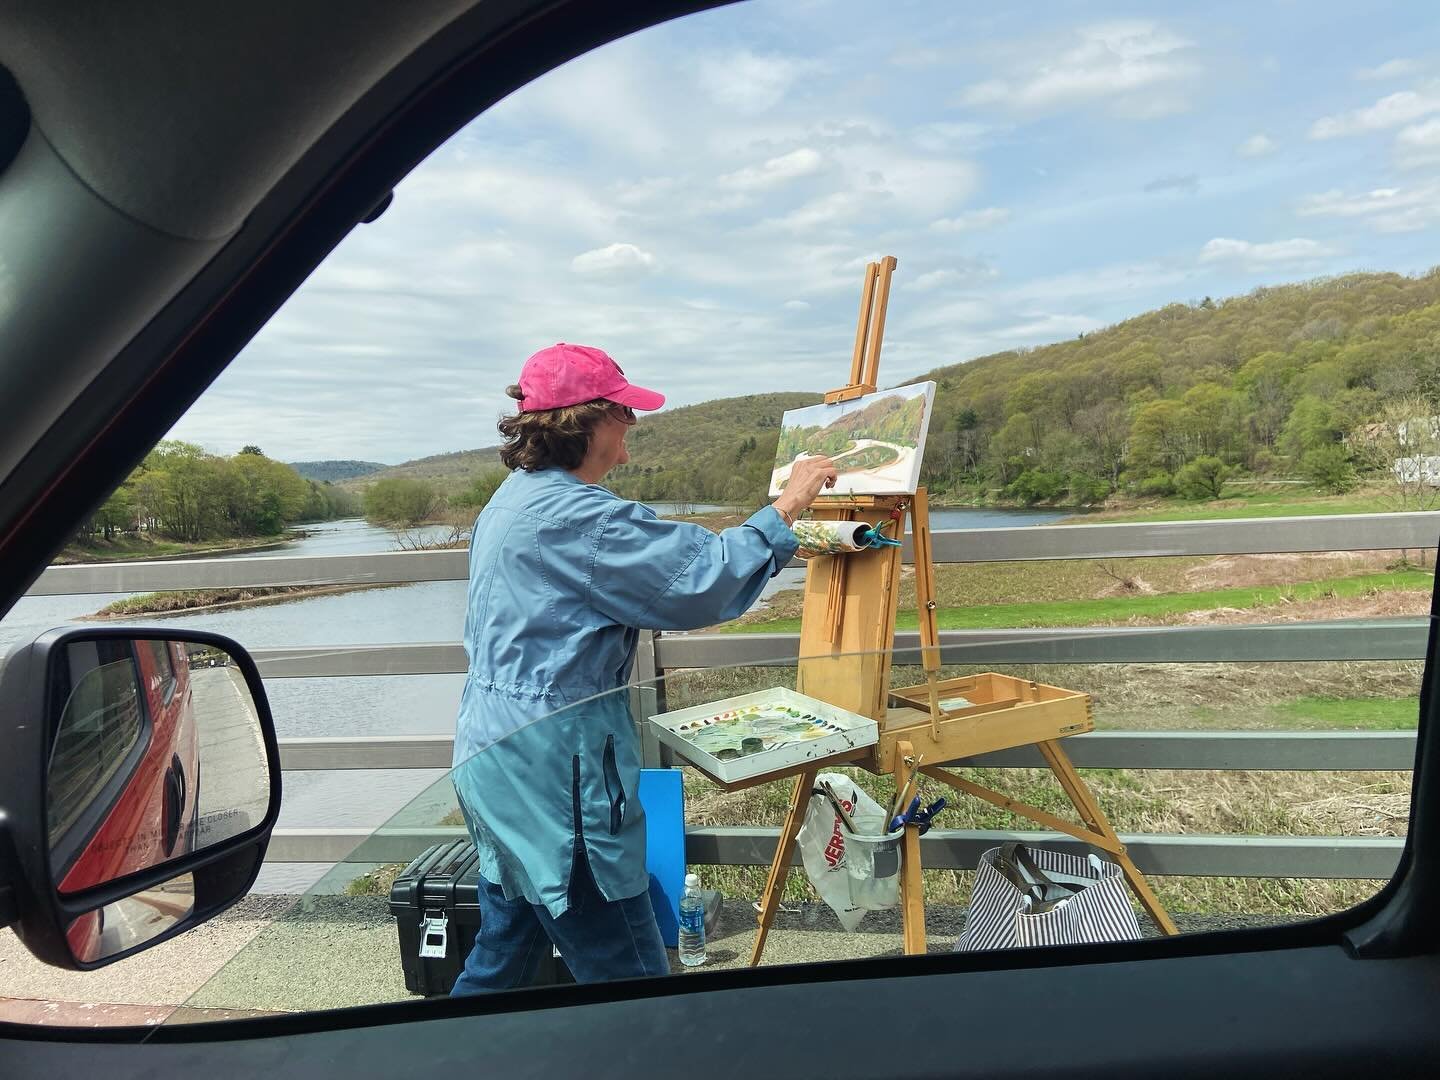 Collective member @kitsailer doing her thing on the bridge between PA and NY! Almost like being in Paris! Love artists everywhere! Bravi!!